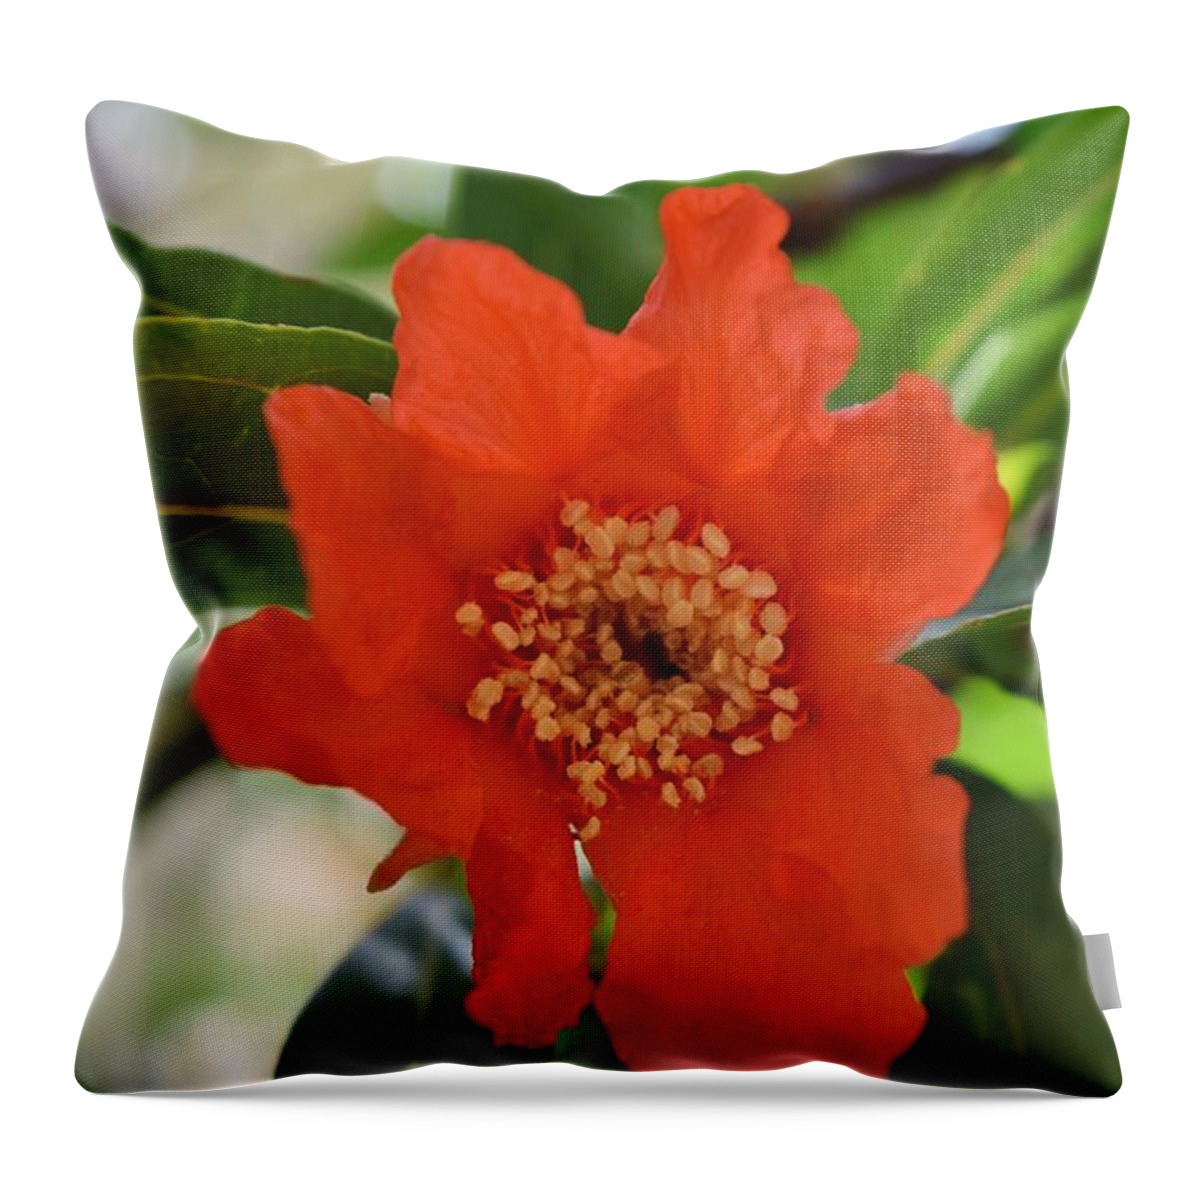 Pomegranate Flower Throw Pillow featuring the photograph Pomegranate Pomp by Janet Marie